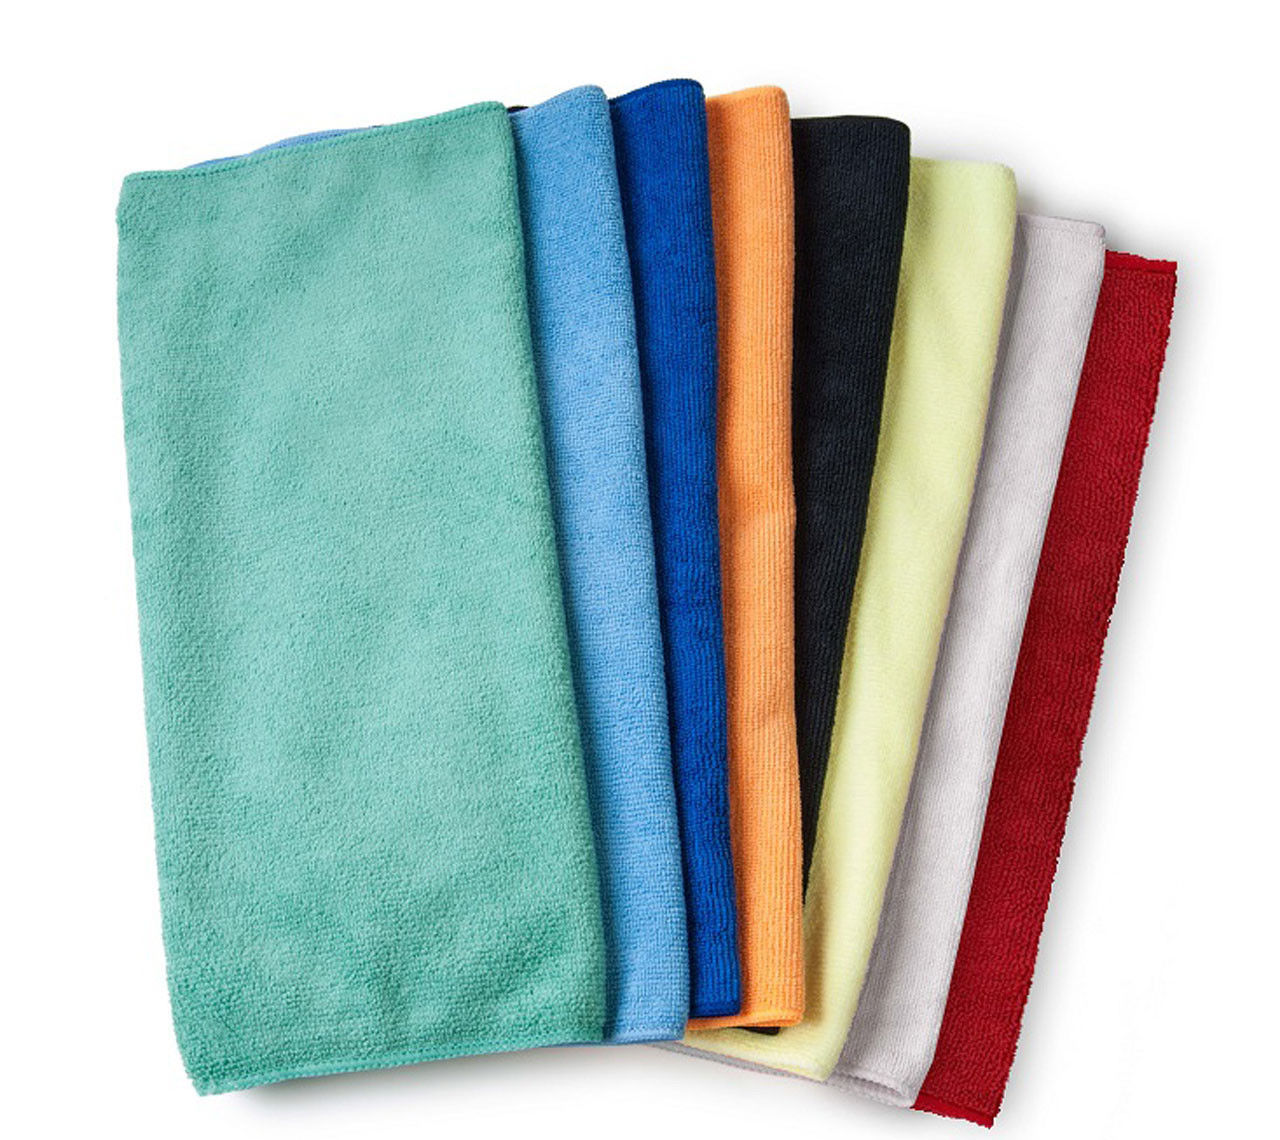 Is microfiber golf towels bulk effective and how do I wash them?